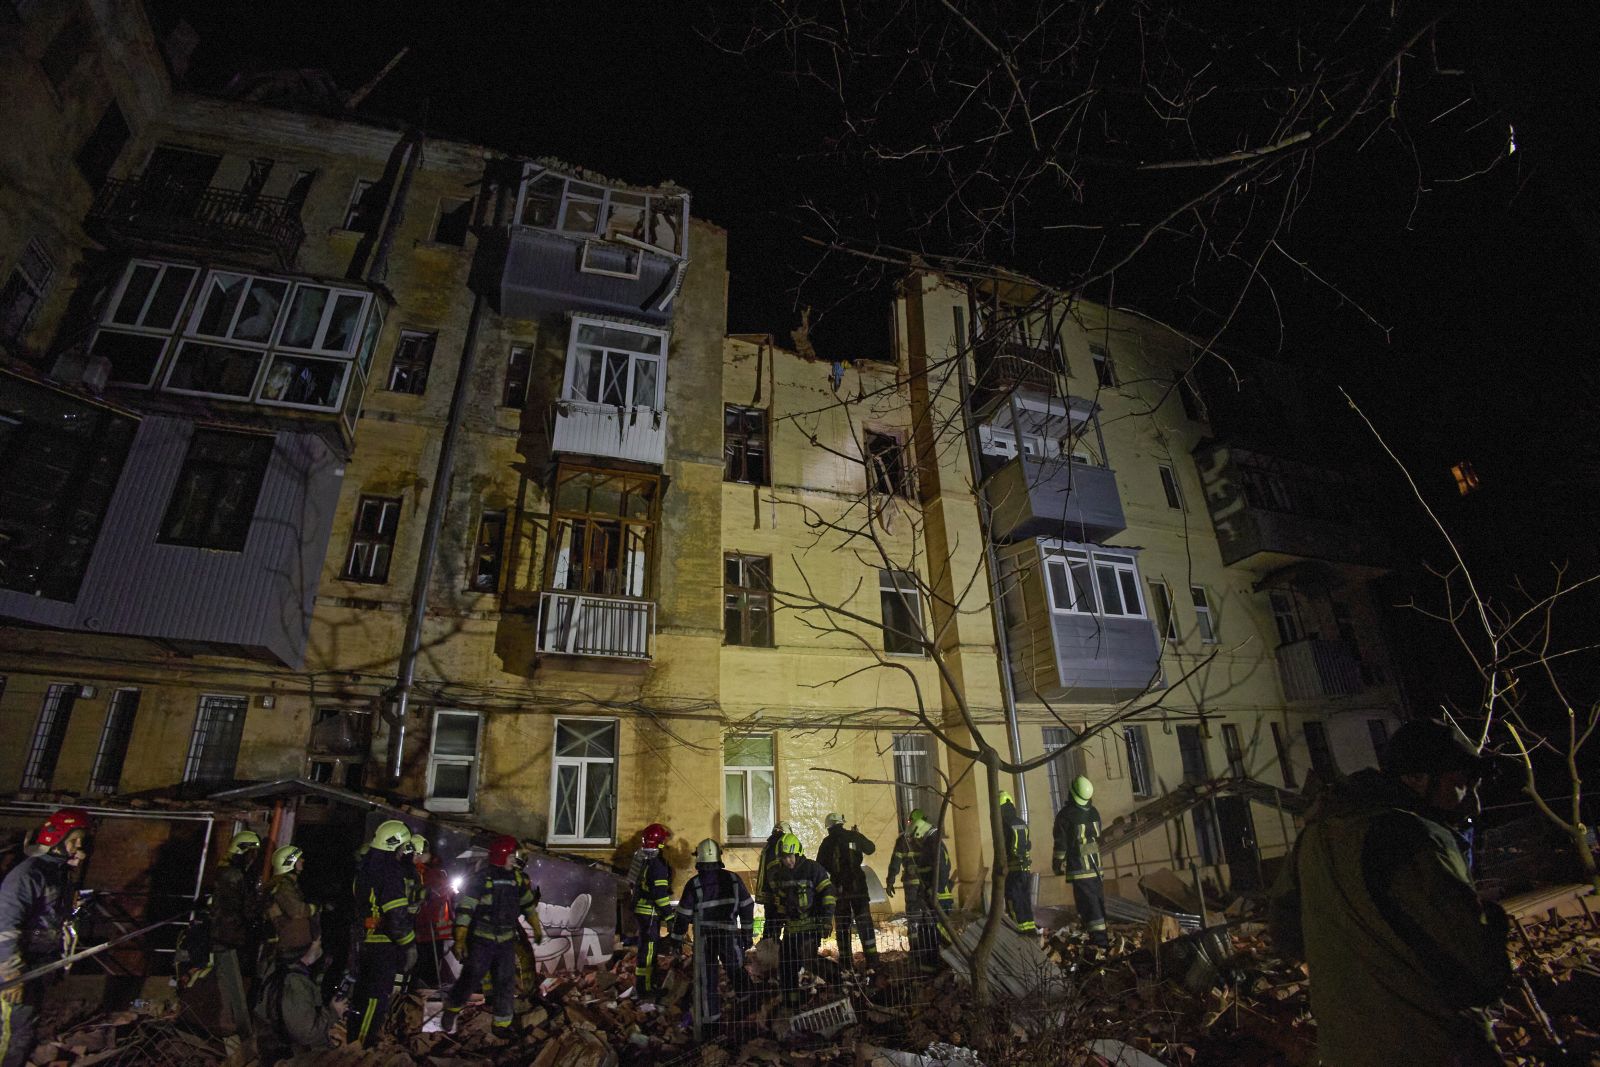 epa10439913 Ukrainian rescuers work on a residential building hit in Russian overnight shelling in Kharkiv, Ukraine, 30 January 2023. At least one woman was killed and three people were injured in the shelling, according to the Ukrainian Emergency Service. Kharkiv and surrounding areas have been the target of heavy shelling since February 2022, when Russian troops entered Ukraine territory starting an armed conflict that has provoked destruction and a humanitarian crisis.  EPA/SERGEY KOZLOV